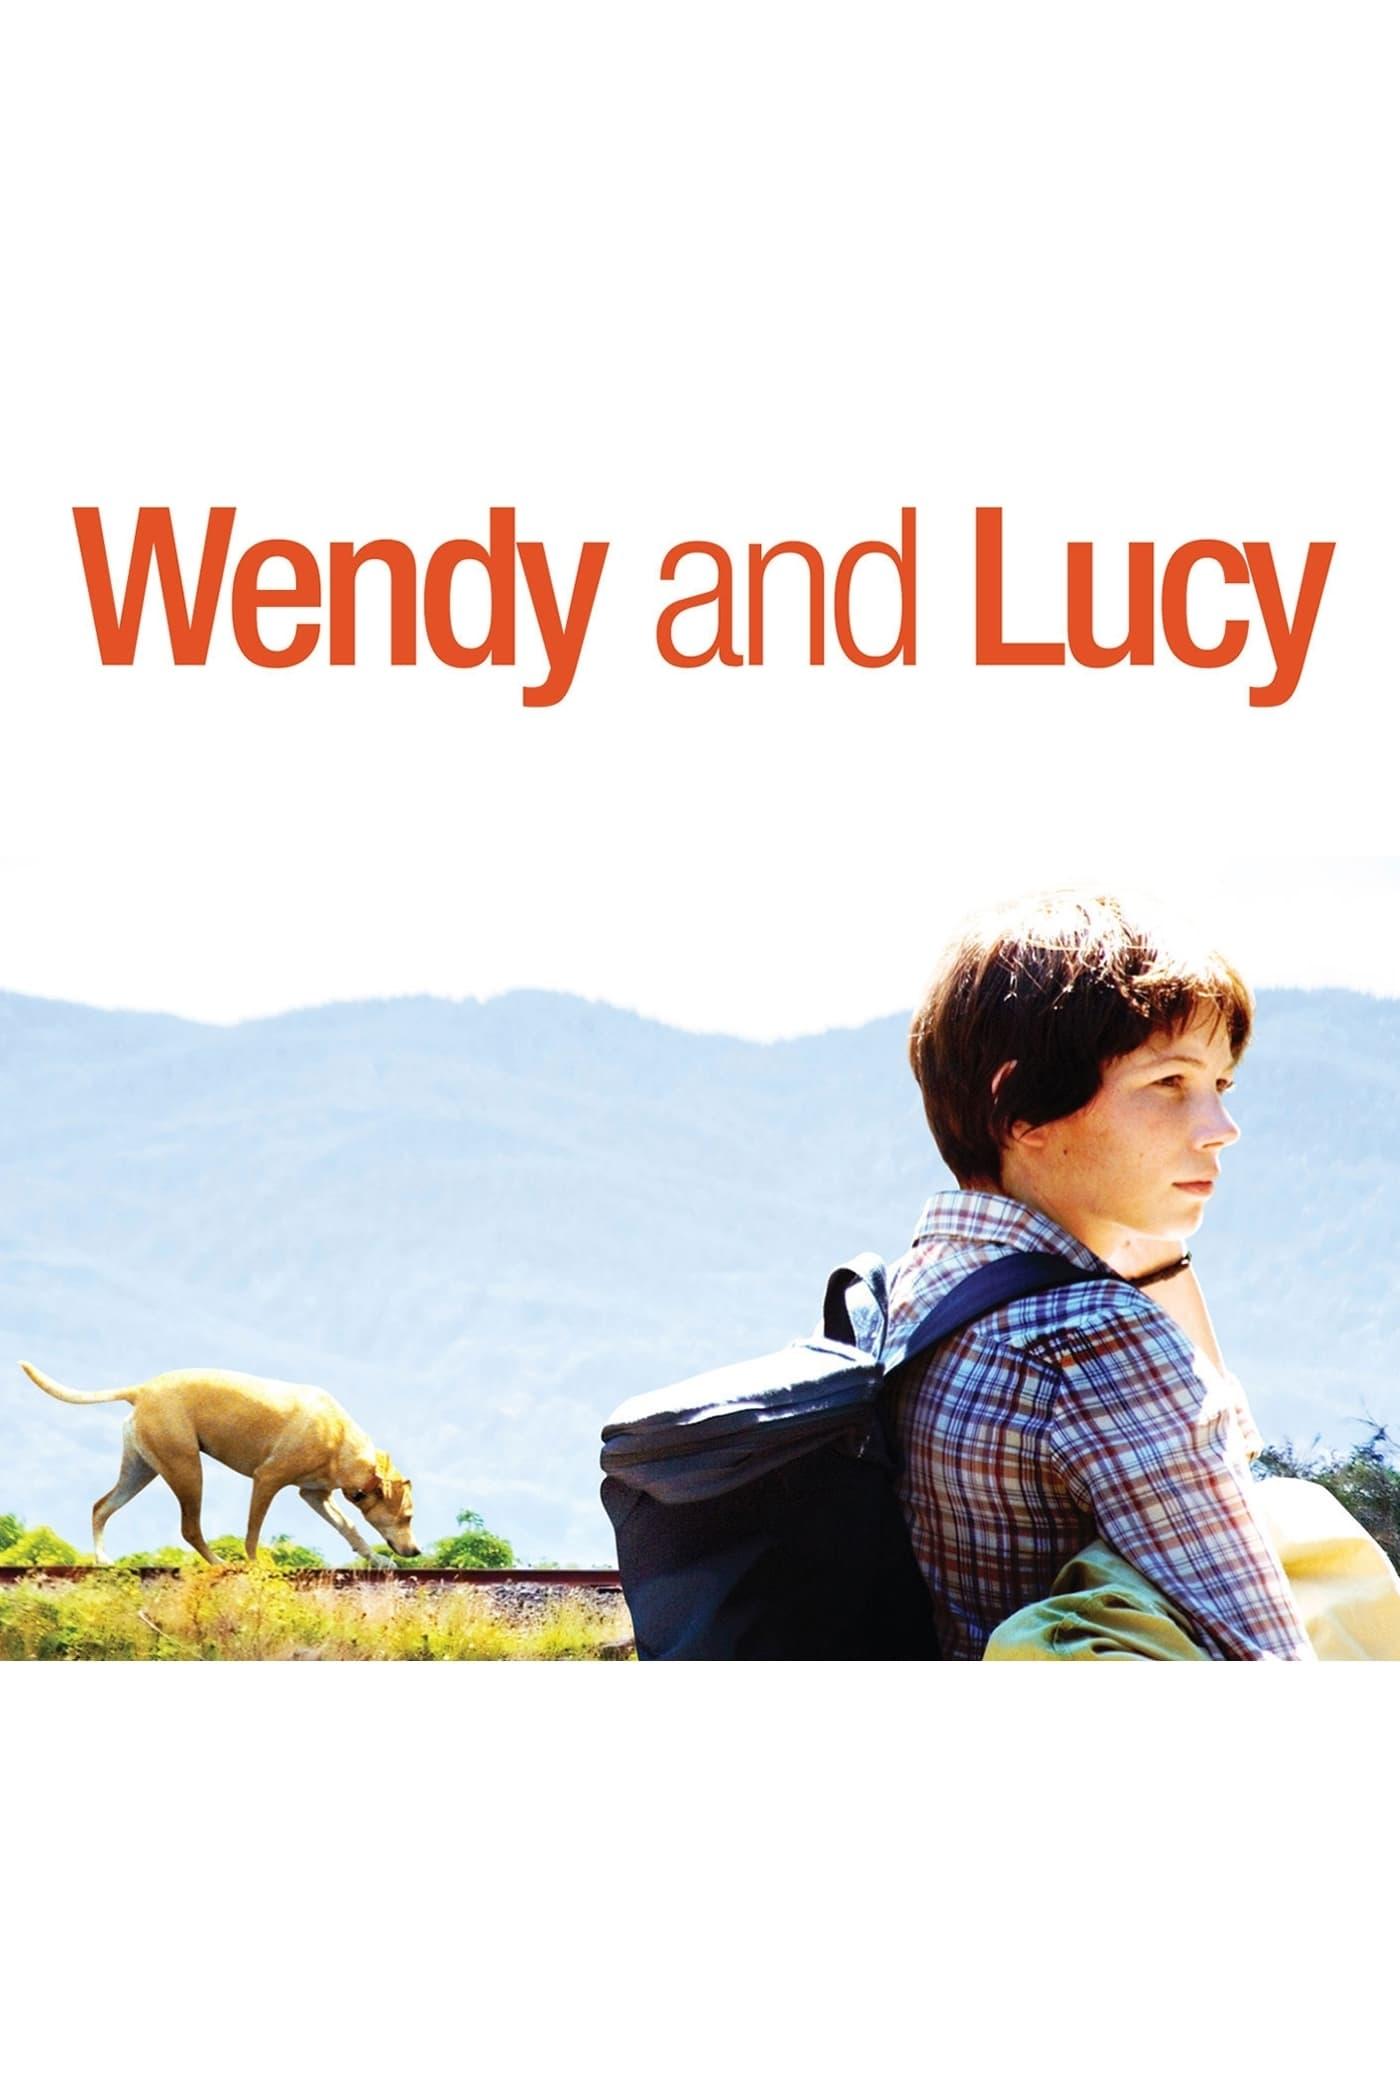 Wendy and Lucy poster